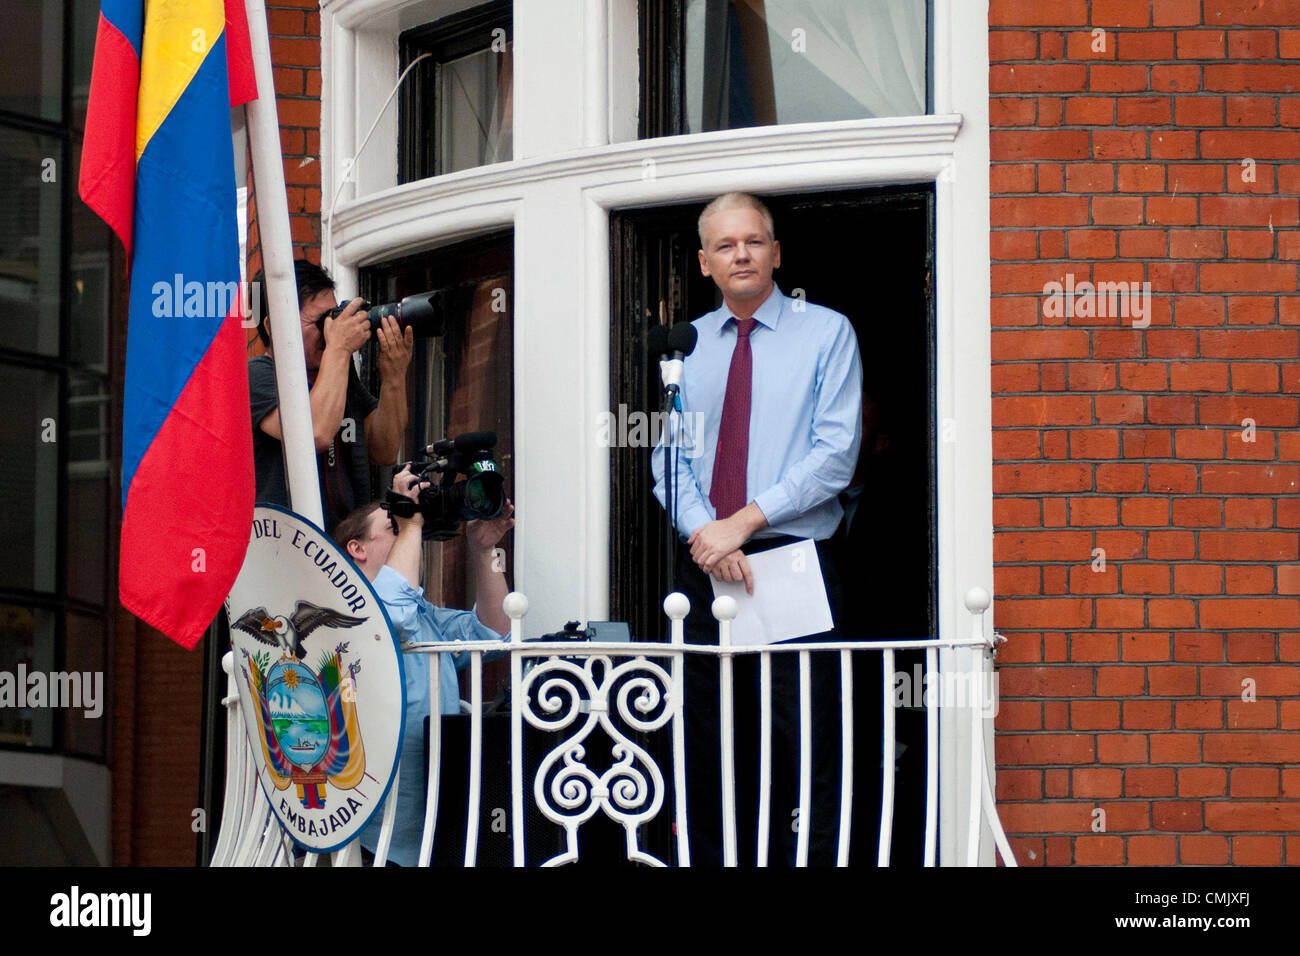 London, UK. 19/08/12. Julian Assange addresses the world's media, supporters and protesters from the ground floor balcony of the Ecuadorian Embassy. Stock Photo